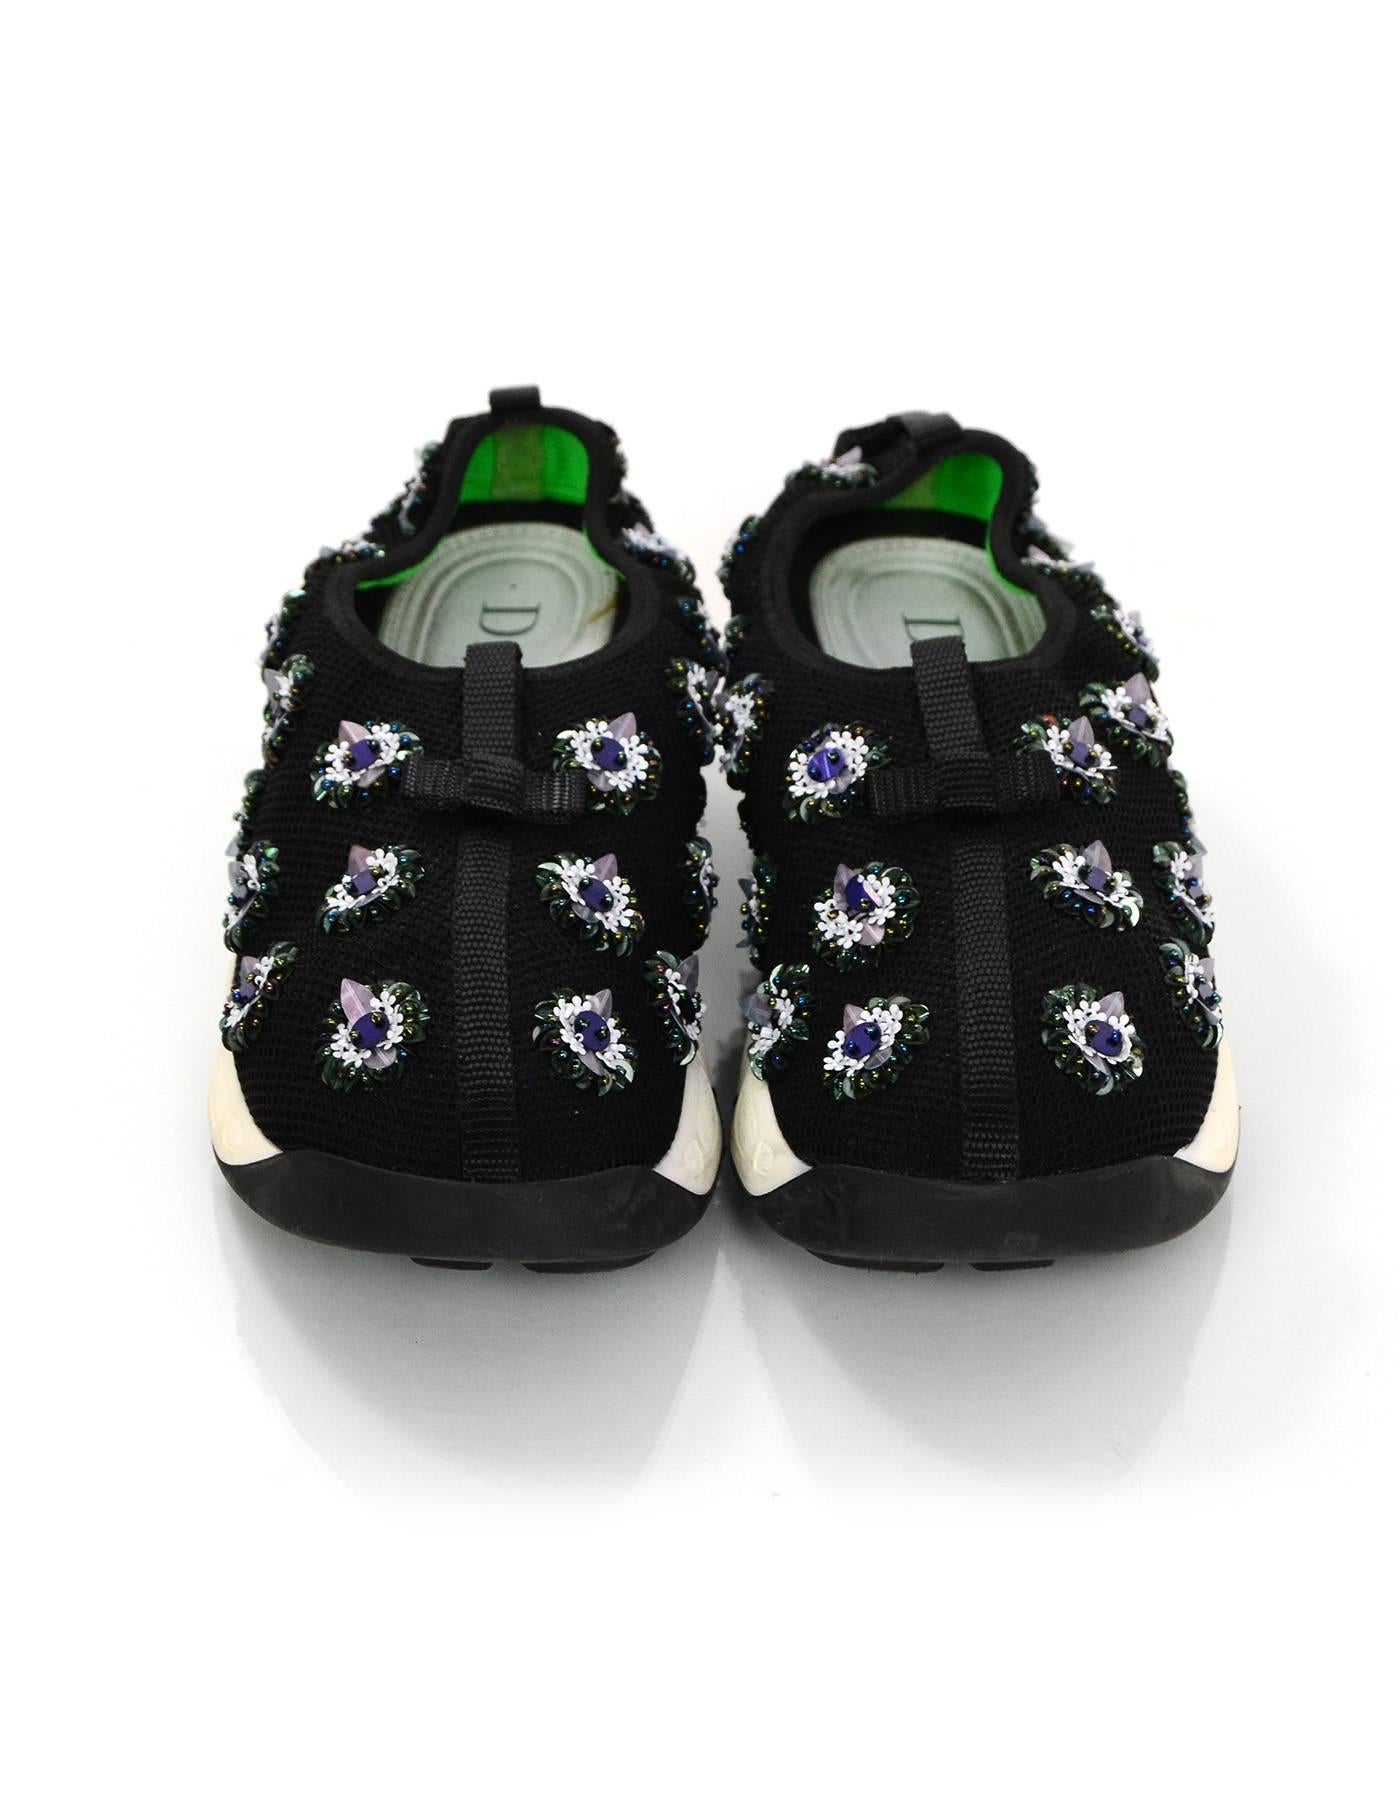 christian dior floral sneakers